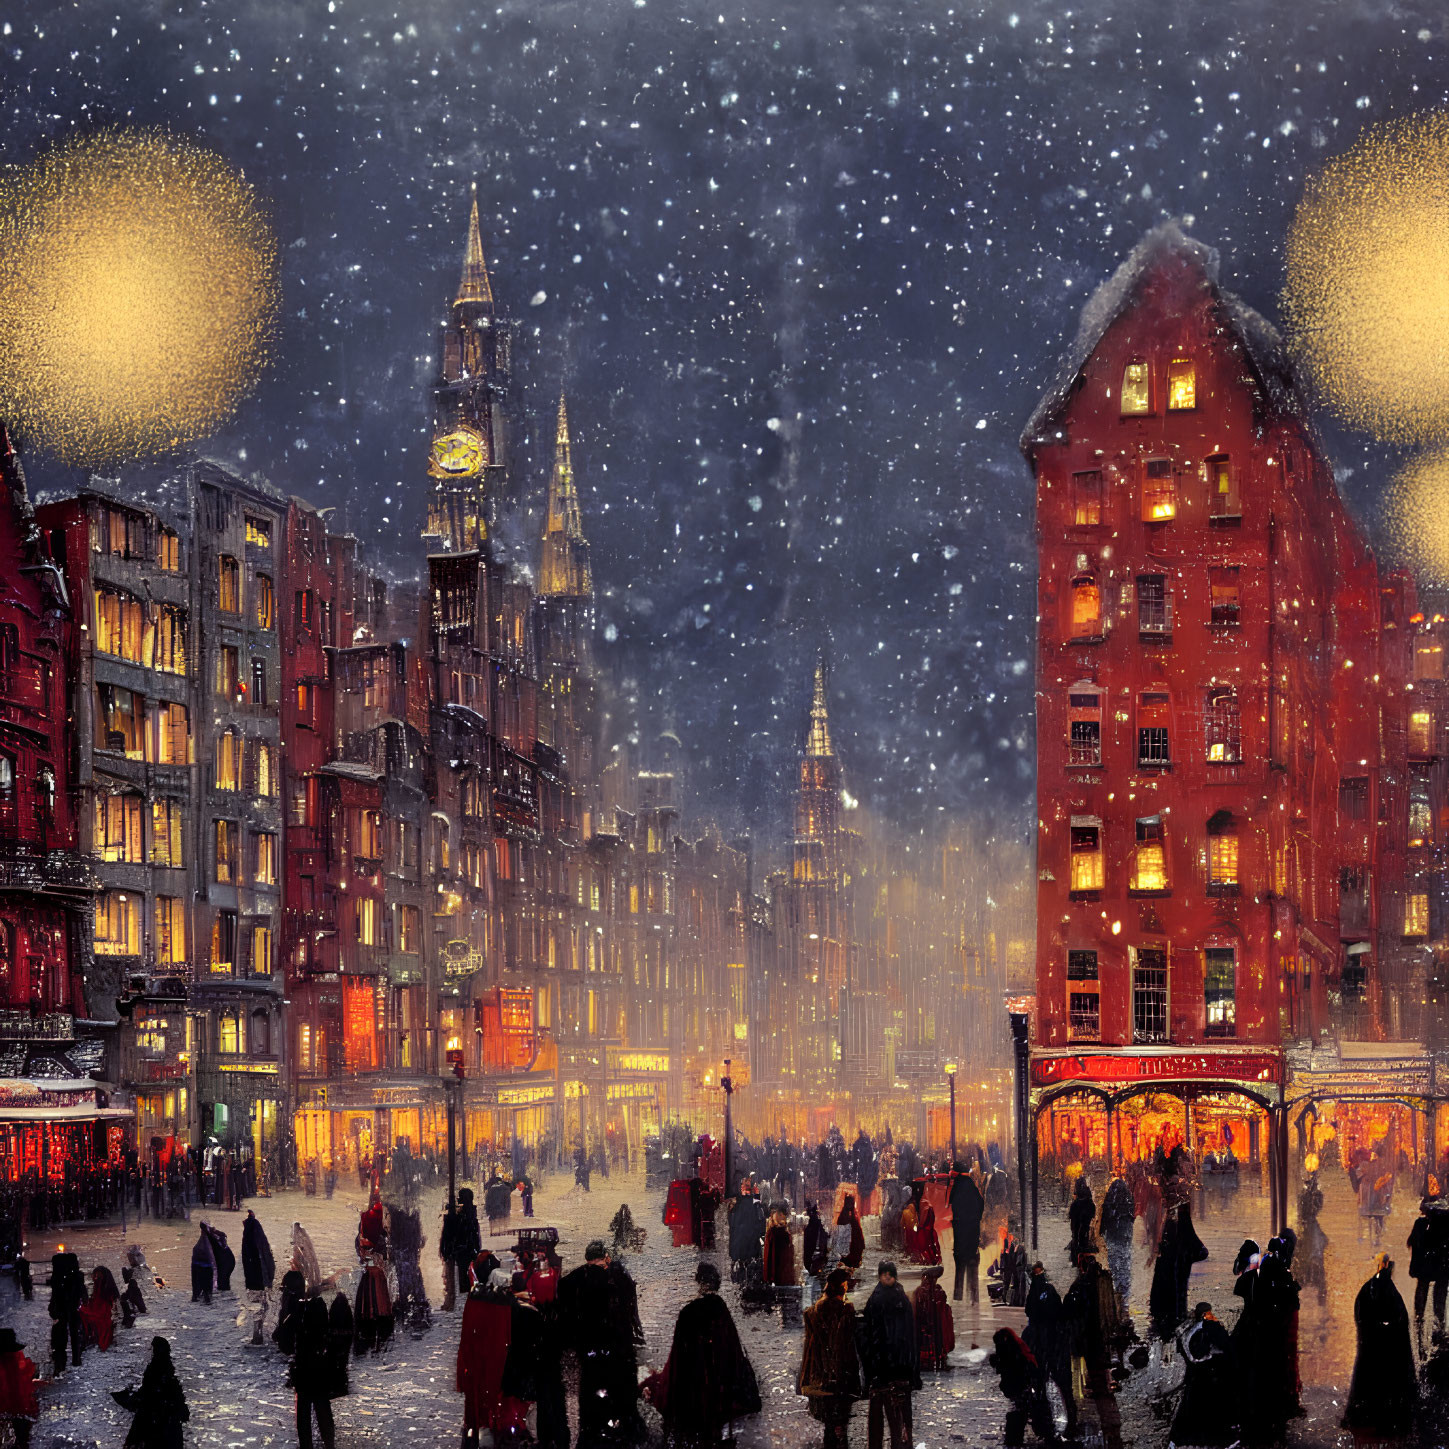 Urban winter night: busy street with falling snow and glowing buildings